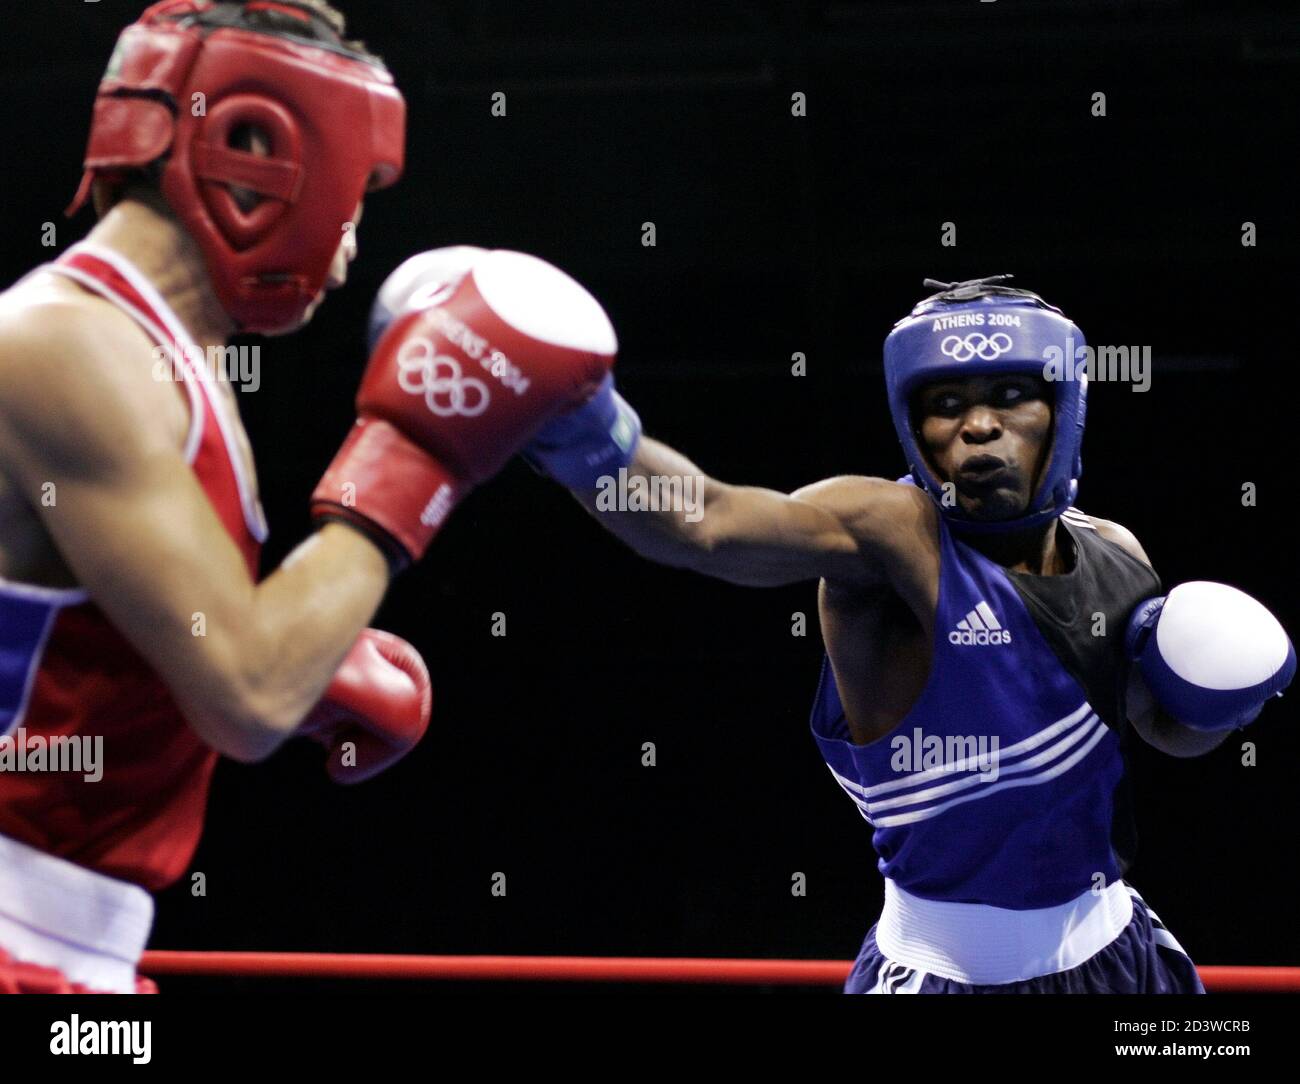 Cuba's Mario Cesar Kindelan Mesa (R) punches Pakistan's Asghar Ali Shan (L) in their light weight (60kg) round of 16 boxing bout at the Athens 2004 Olympic Summer Games, August 20, 2004. Cesar Kindelan Mesa won the bout. Stock Photo